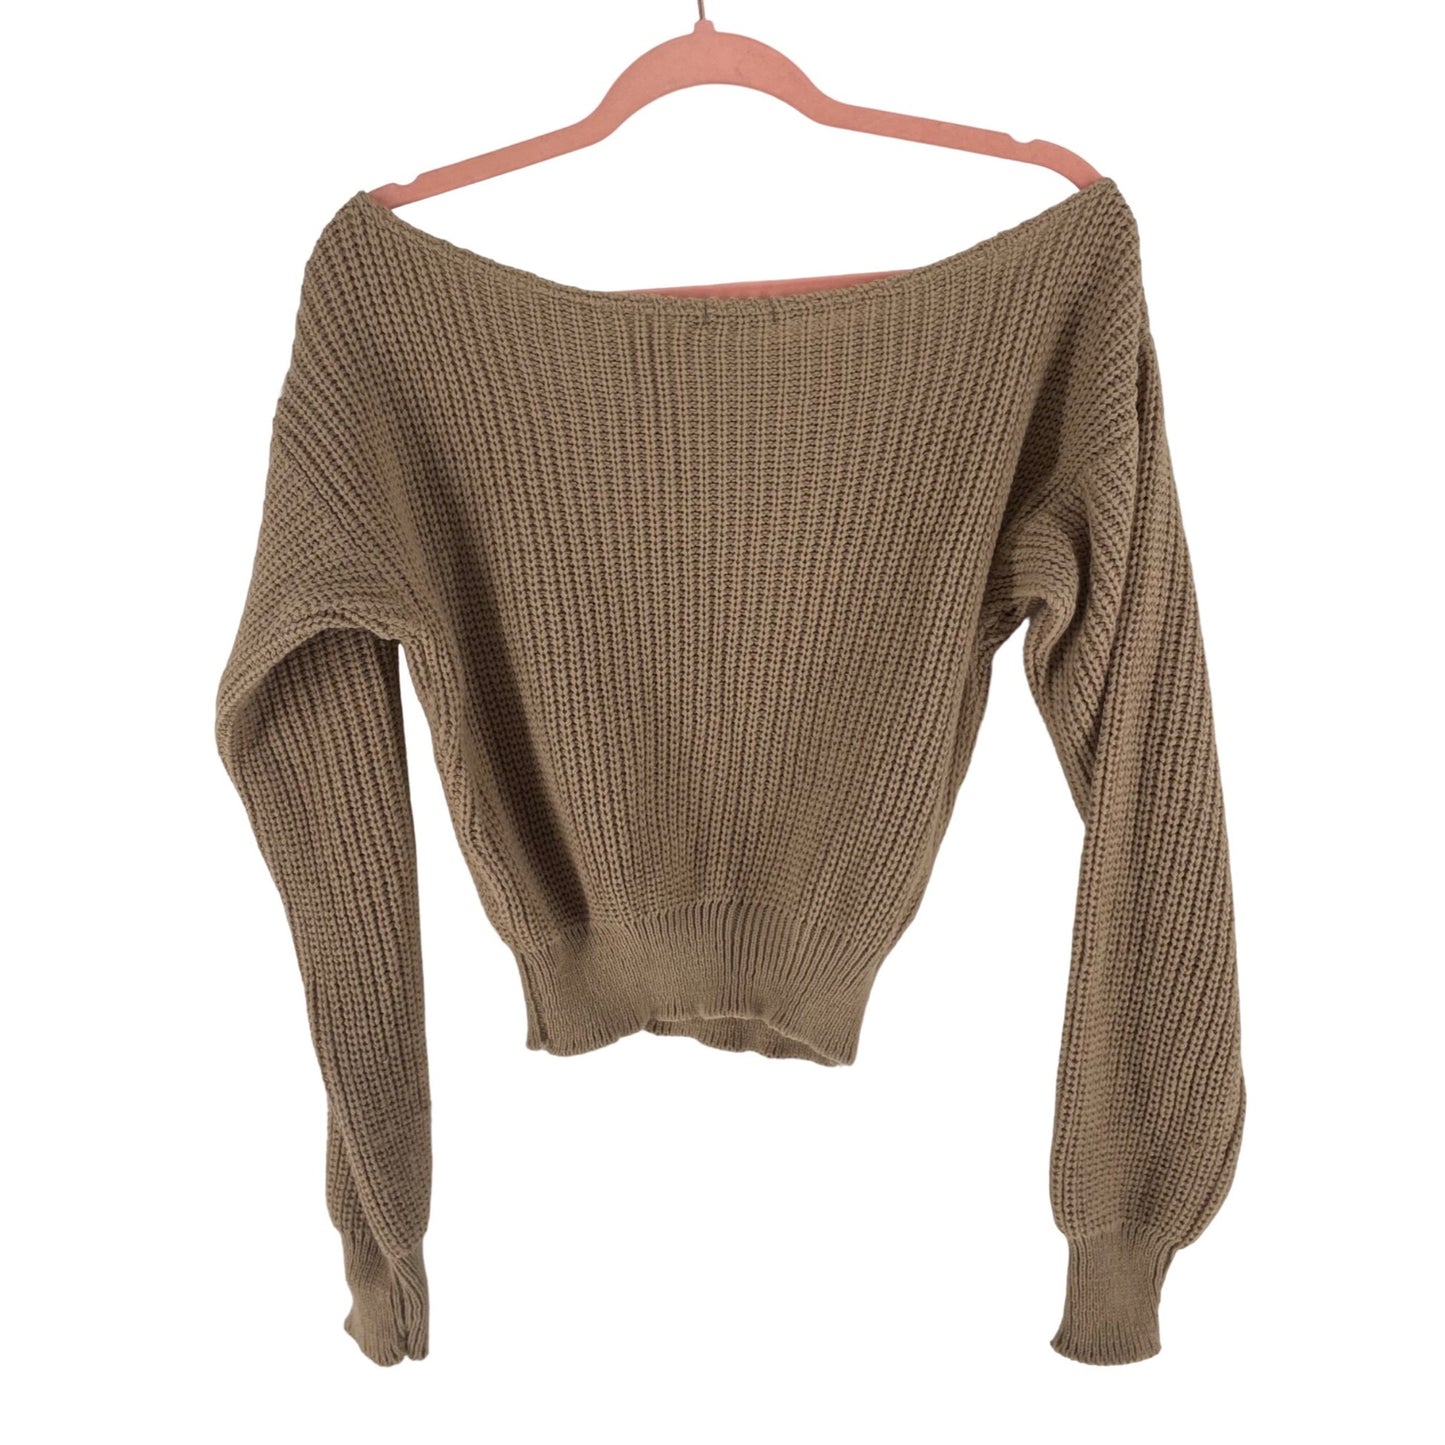 Boohoo Women's Size Small Tan Off-The-Shoulder Cropped Sweater